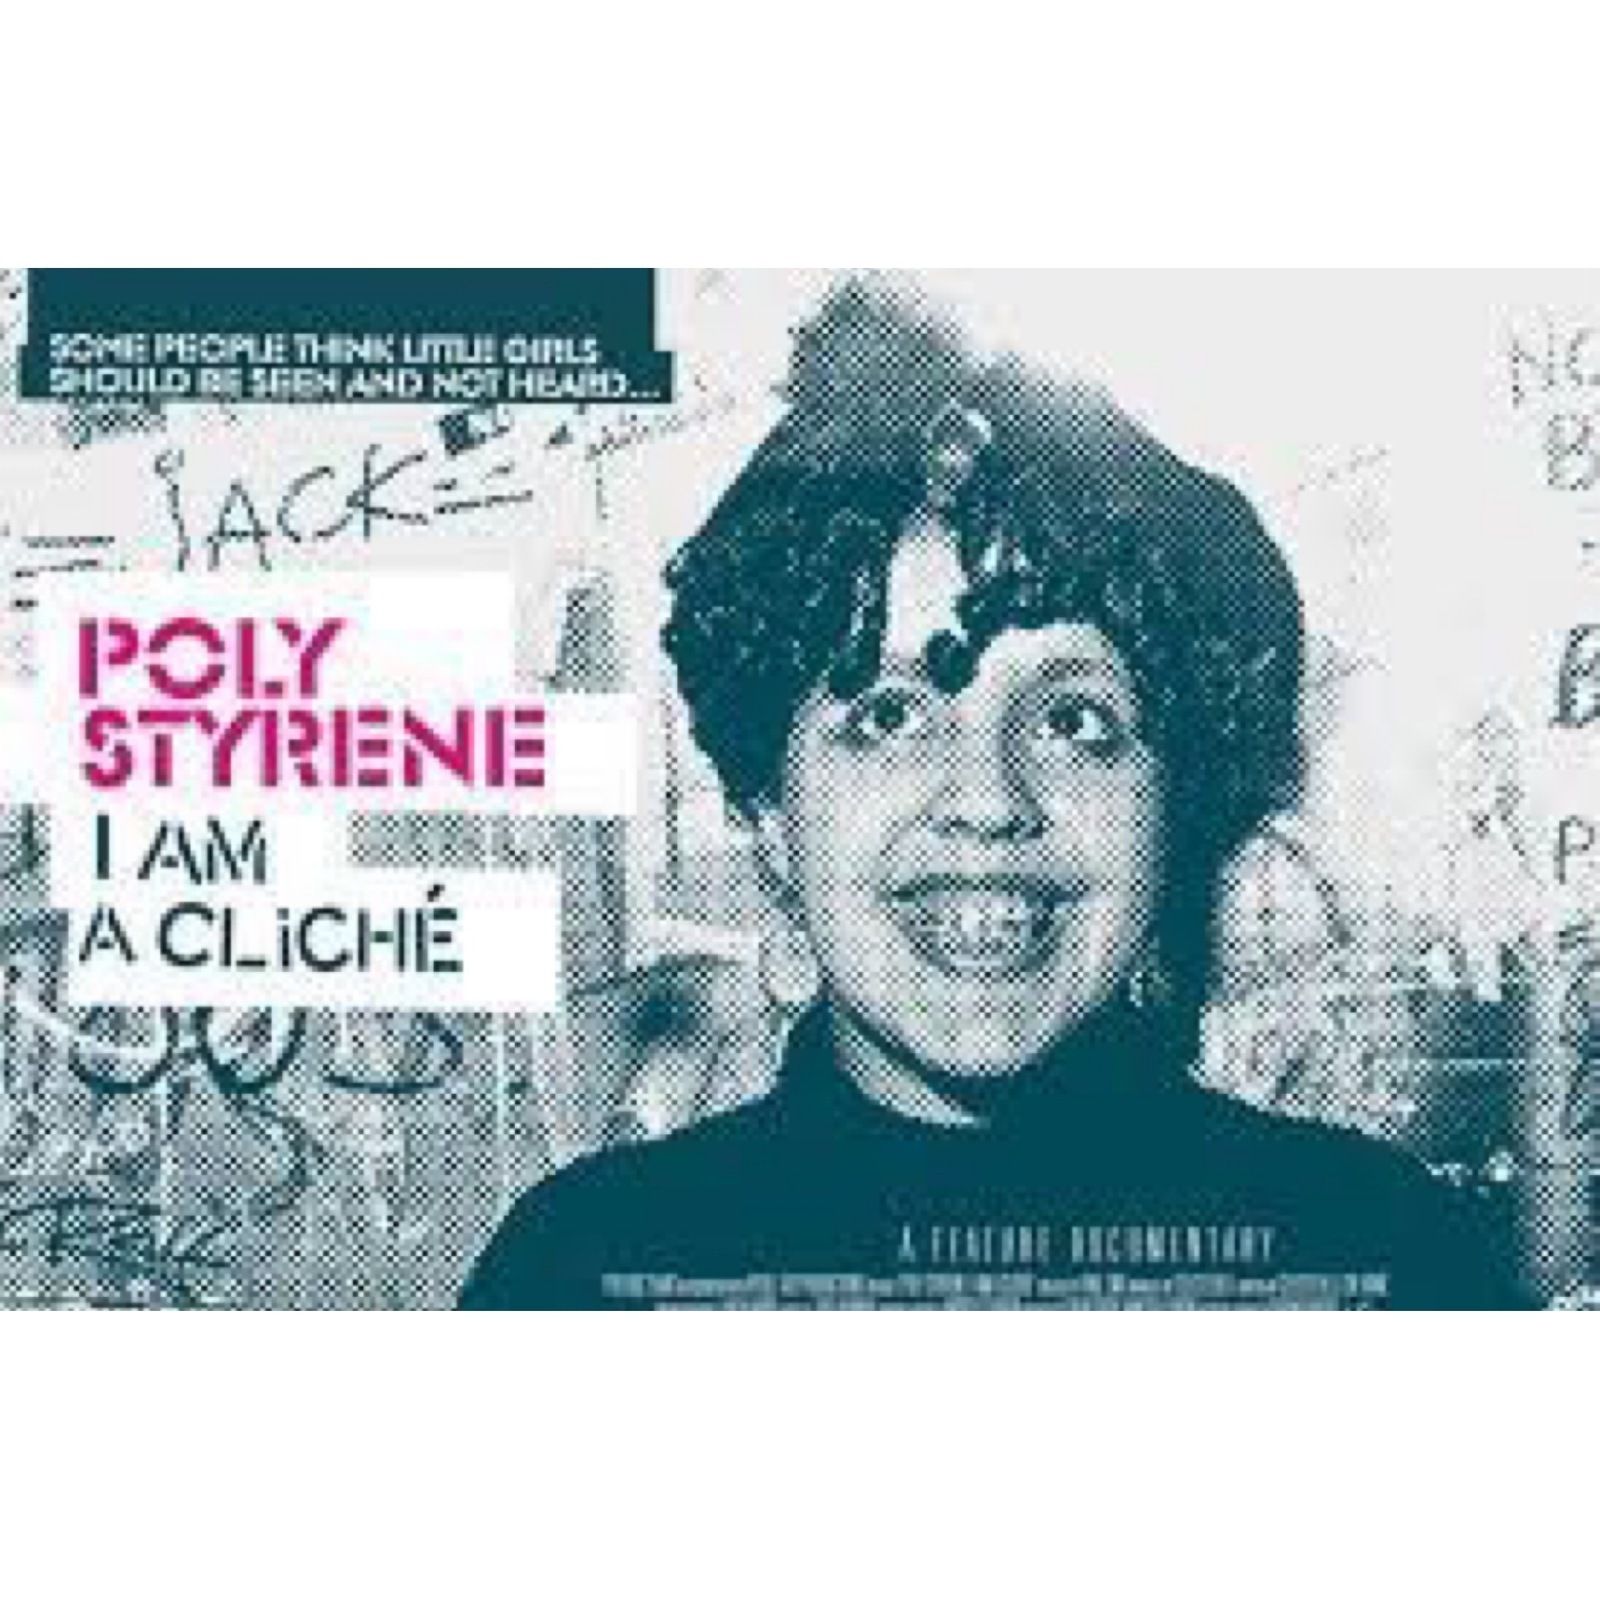 TOAP ”Poly Styrene: I Am A Cliche” Special (Celeste Bell/ Paul Sng)